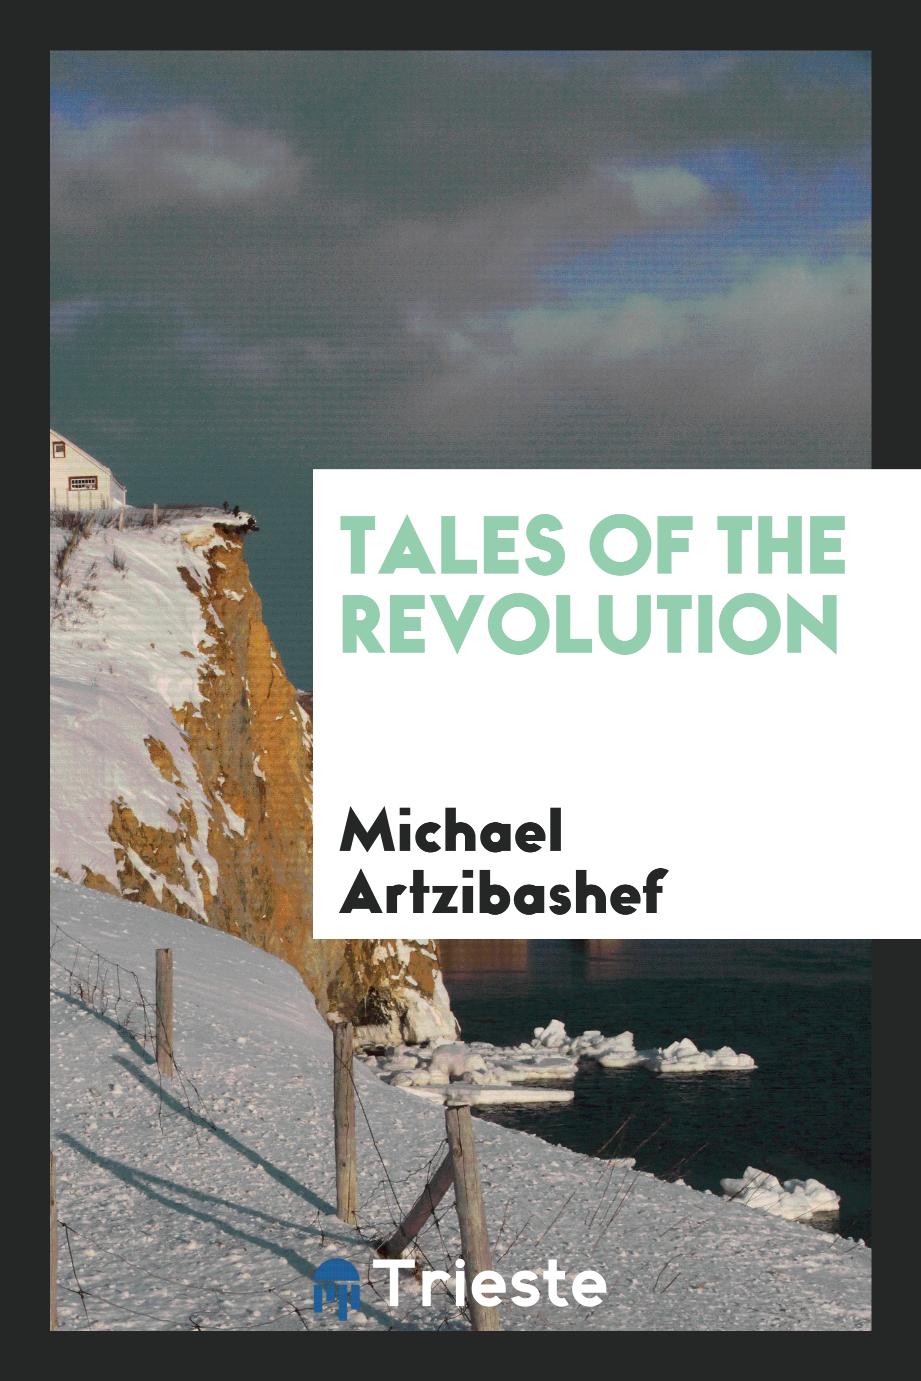 Tales of the revolution